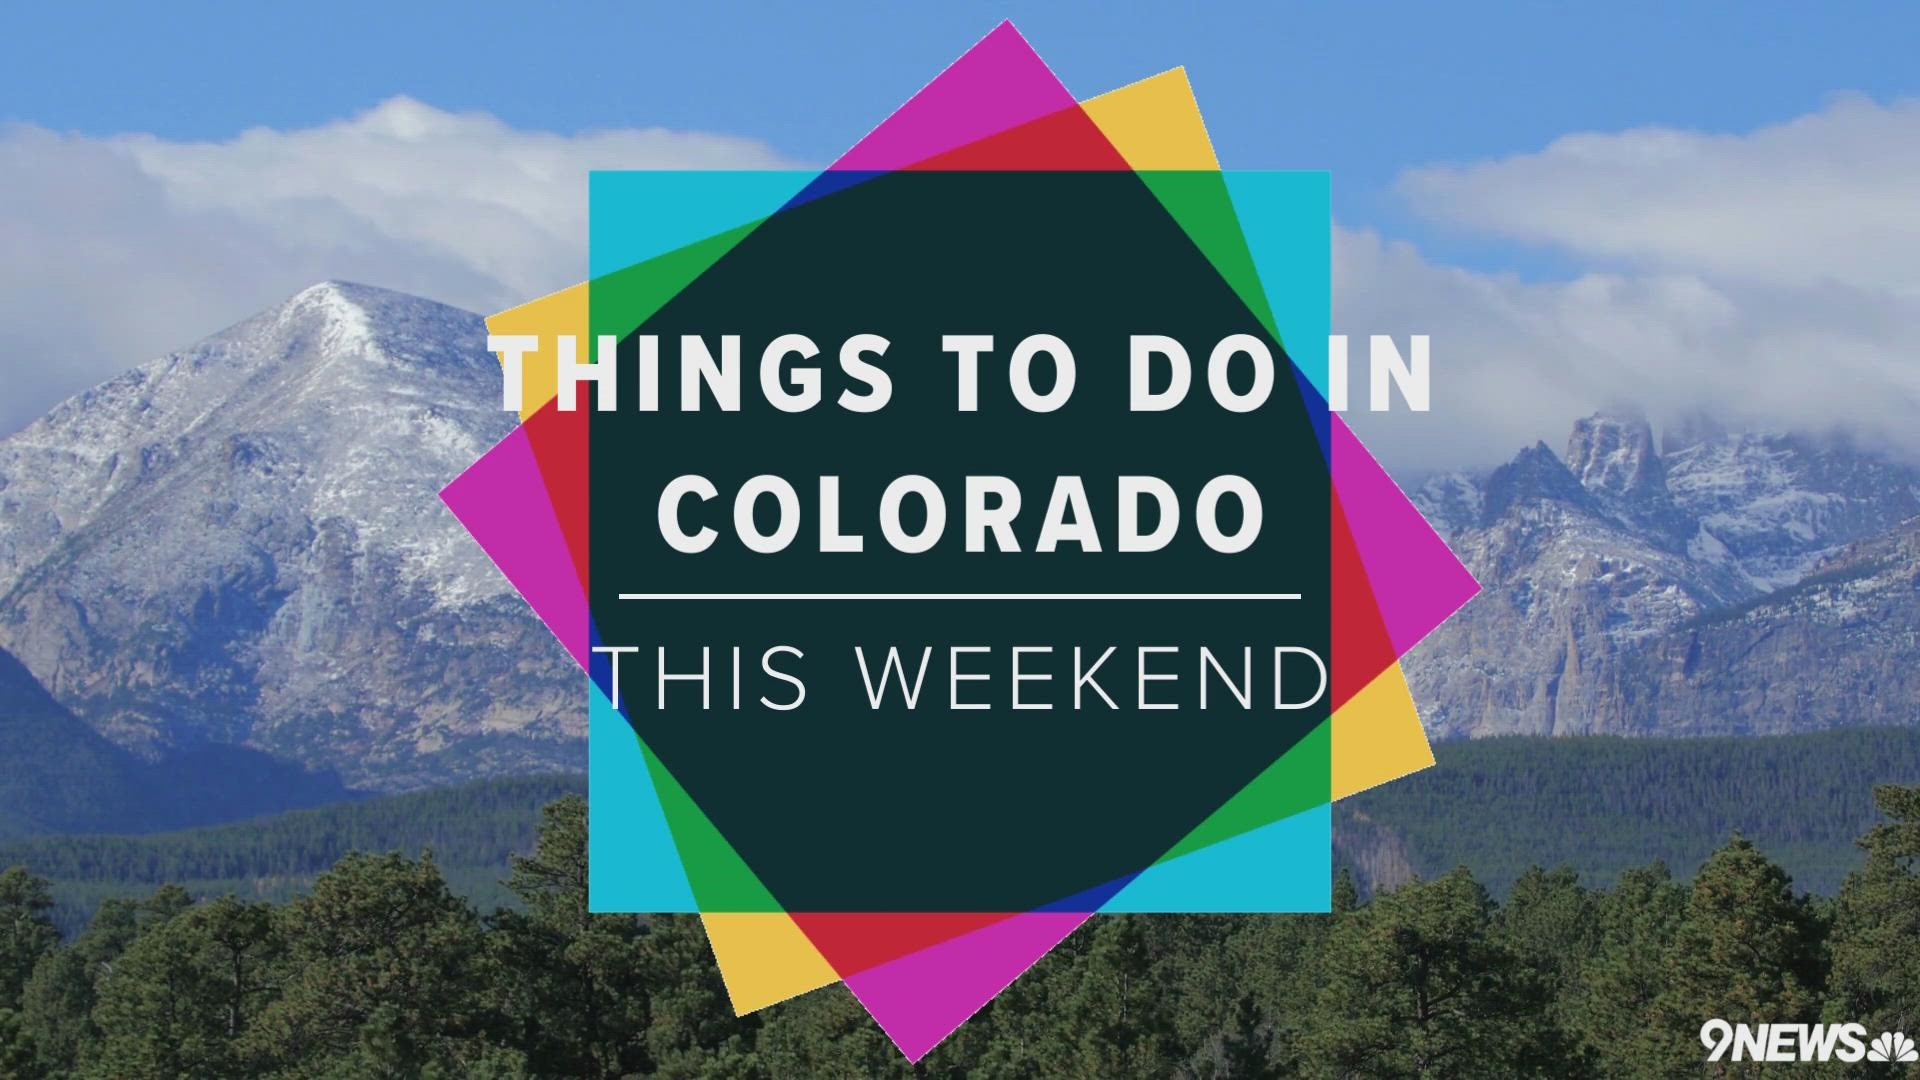 This weekend brings art and plant sales, science, kite and Shakespeare festivals and monster trucks to Colorado.